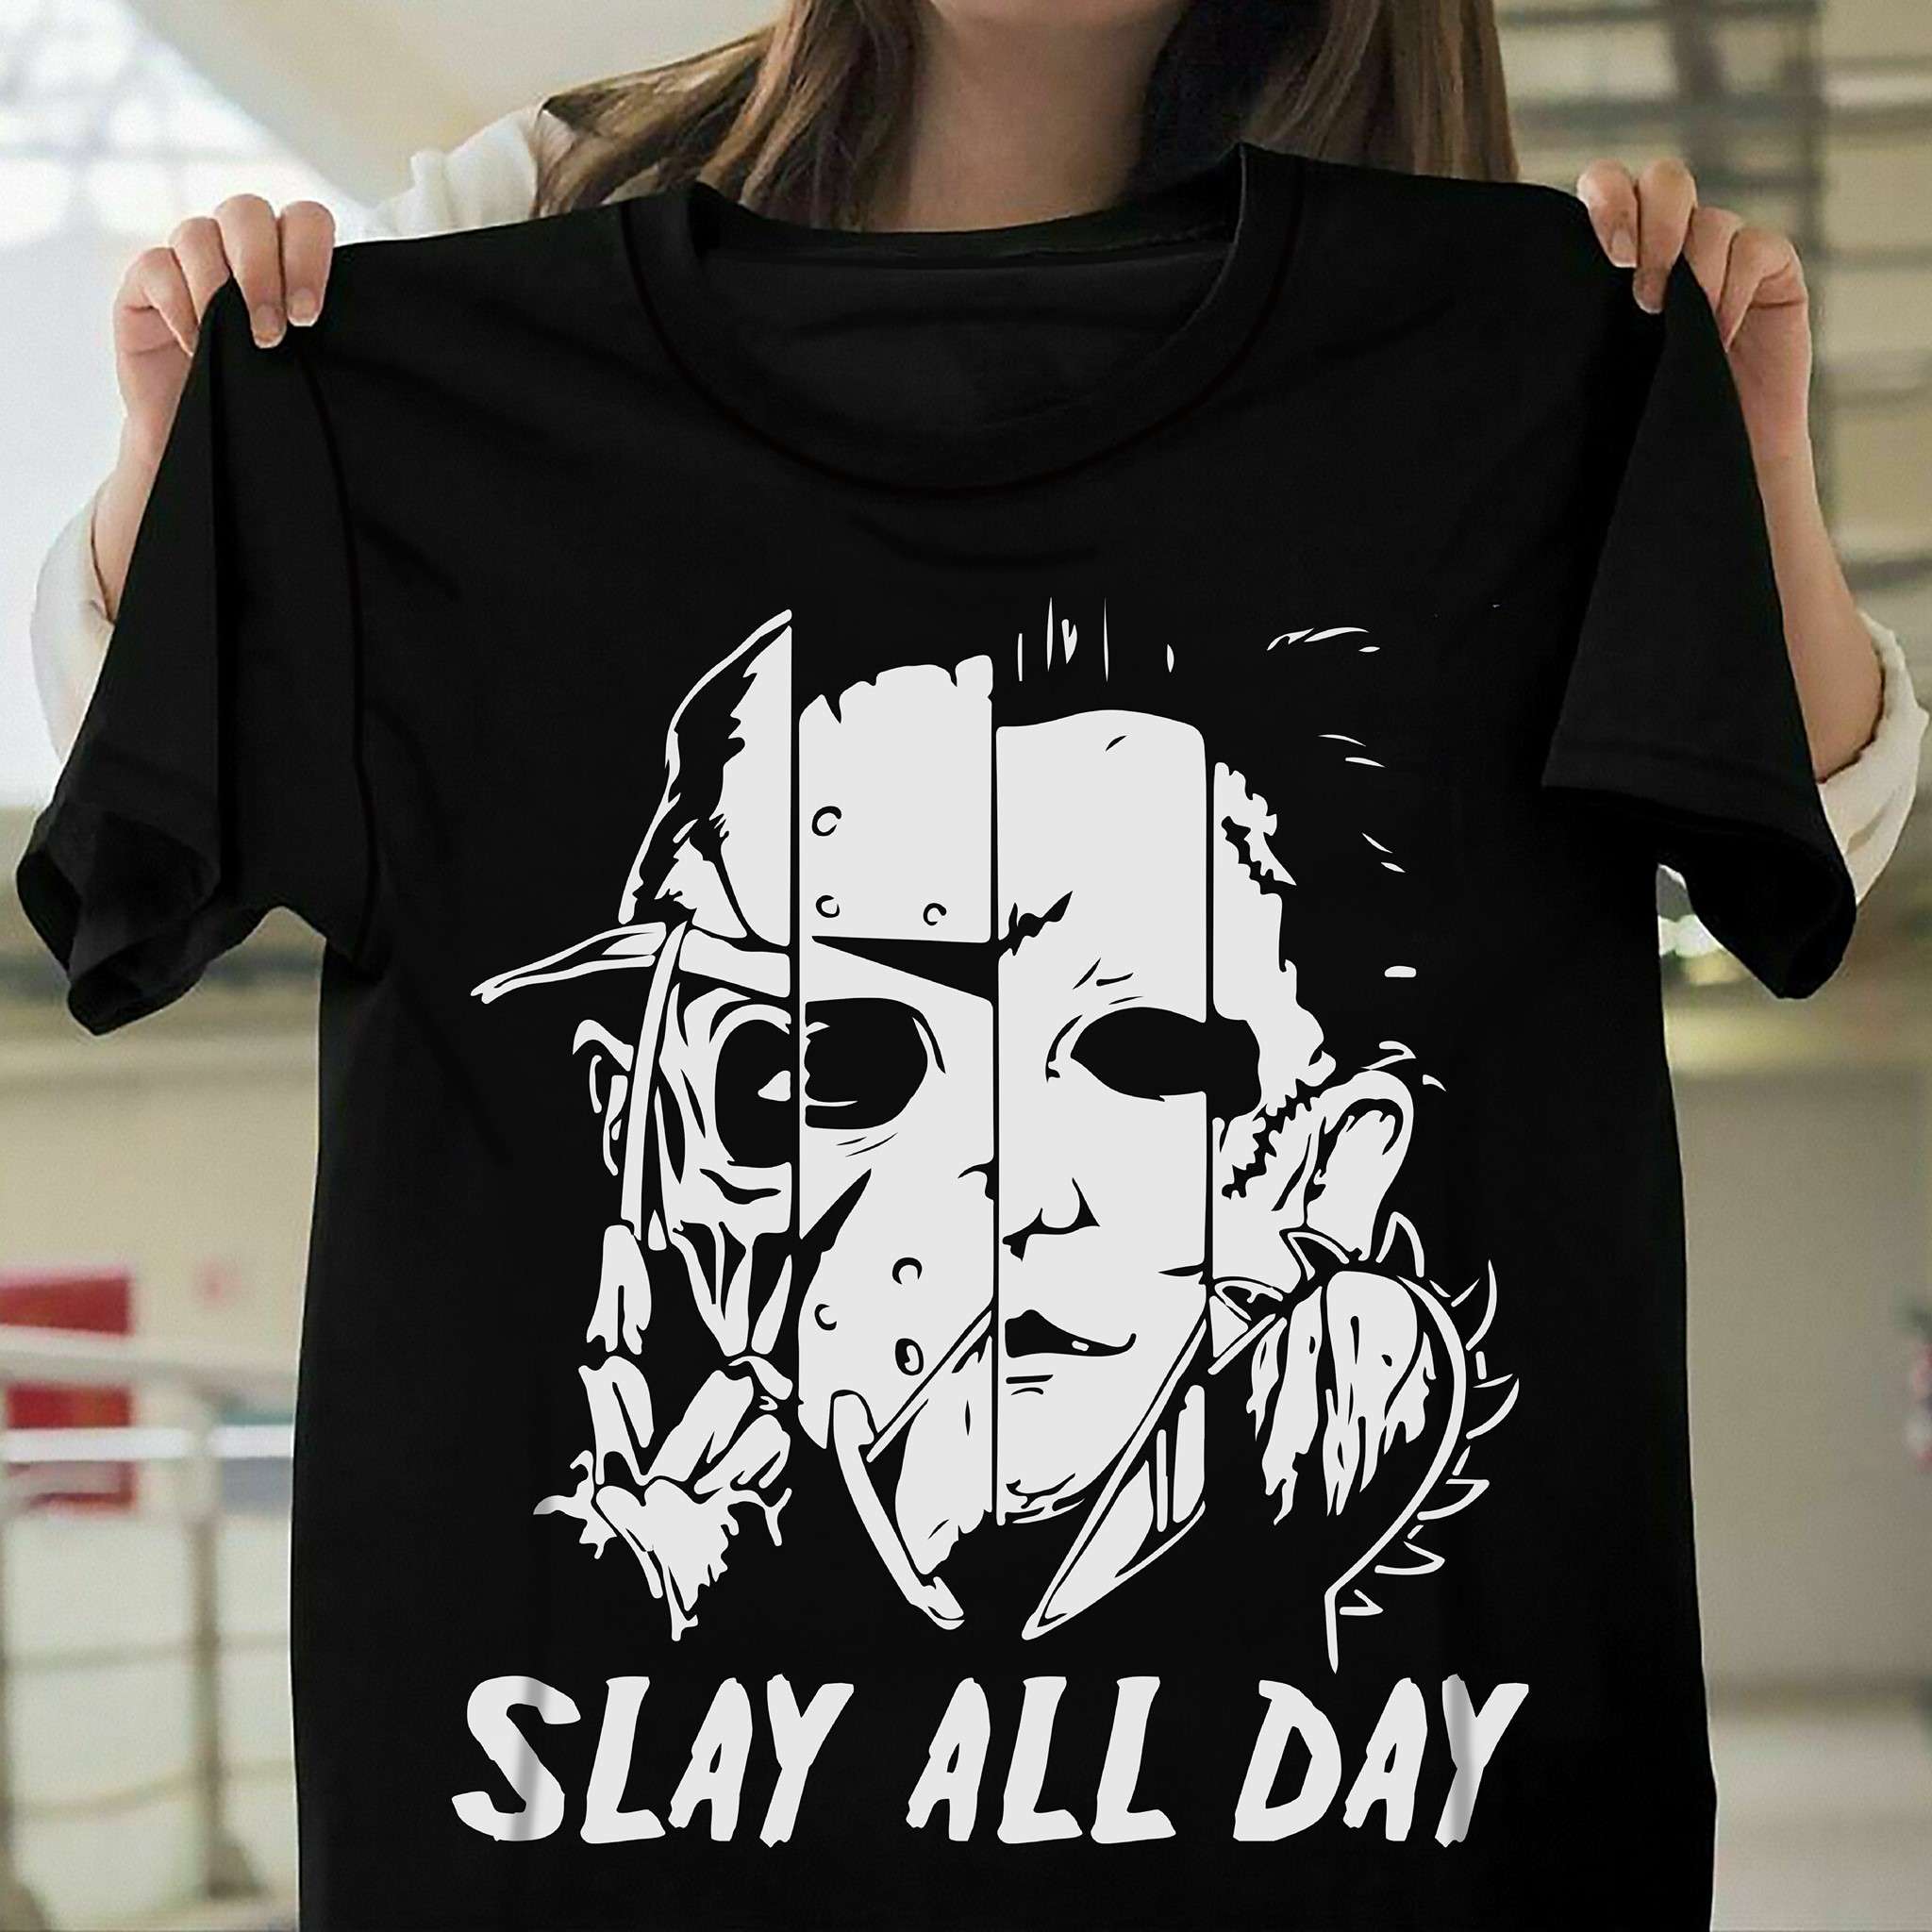 Slay all day - Horror character costume Halloween, Jayson Voorhees the killer